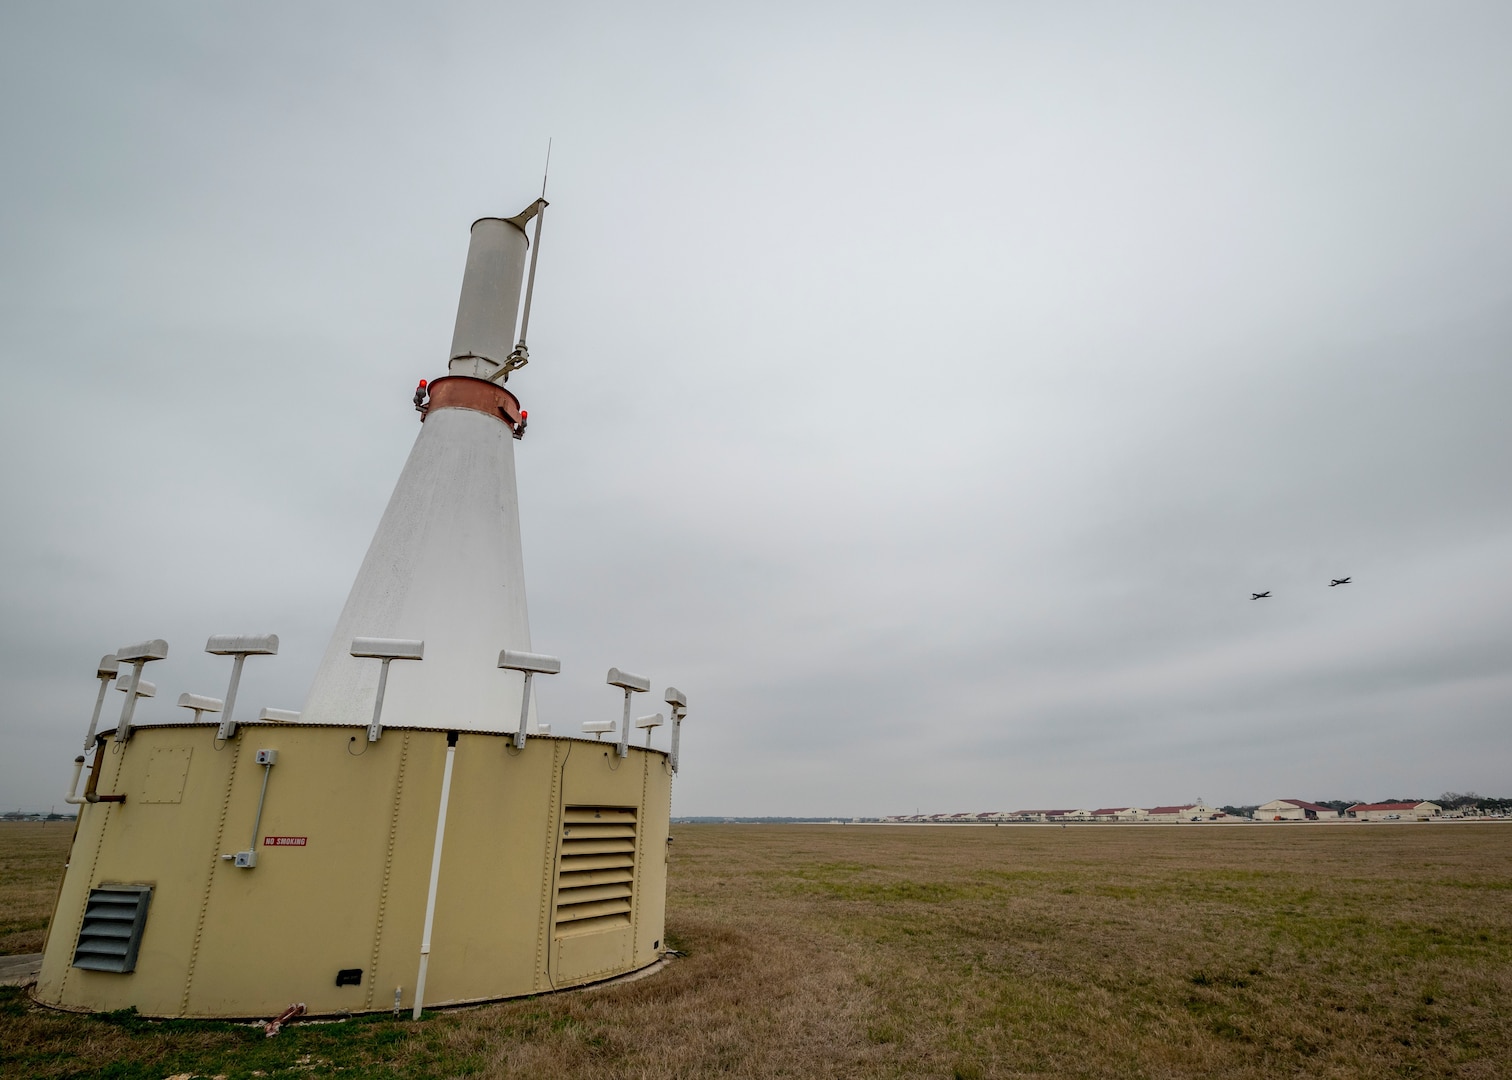 The VORTAC is a combination between antennas for Very High Frequency Omni-Directional Range, VOR, and Tactical Air Navigation, TACAN. Both systems allow for precise navigation from any compass direction within 100-200 nautical miles to directly over the beacon on the west side of the airfield.